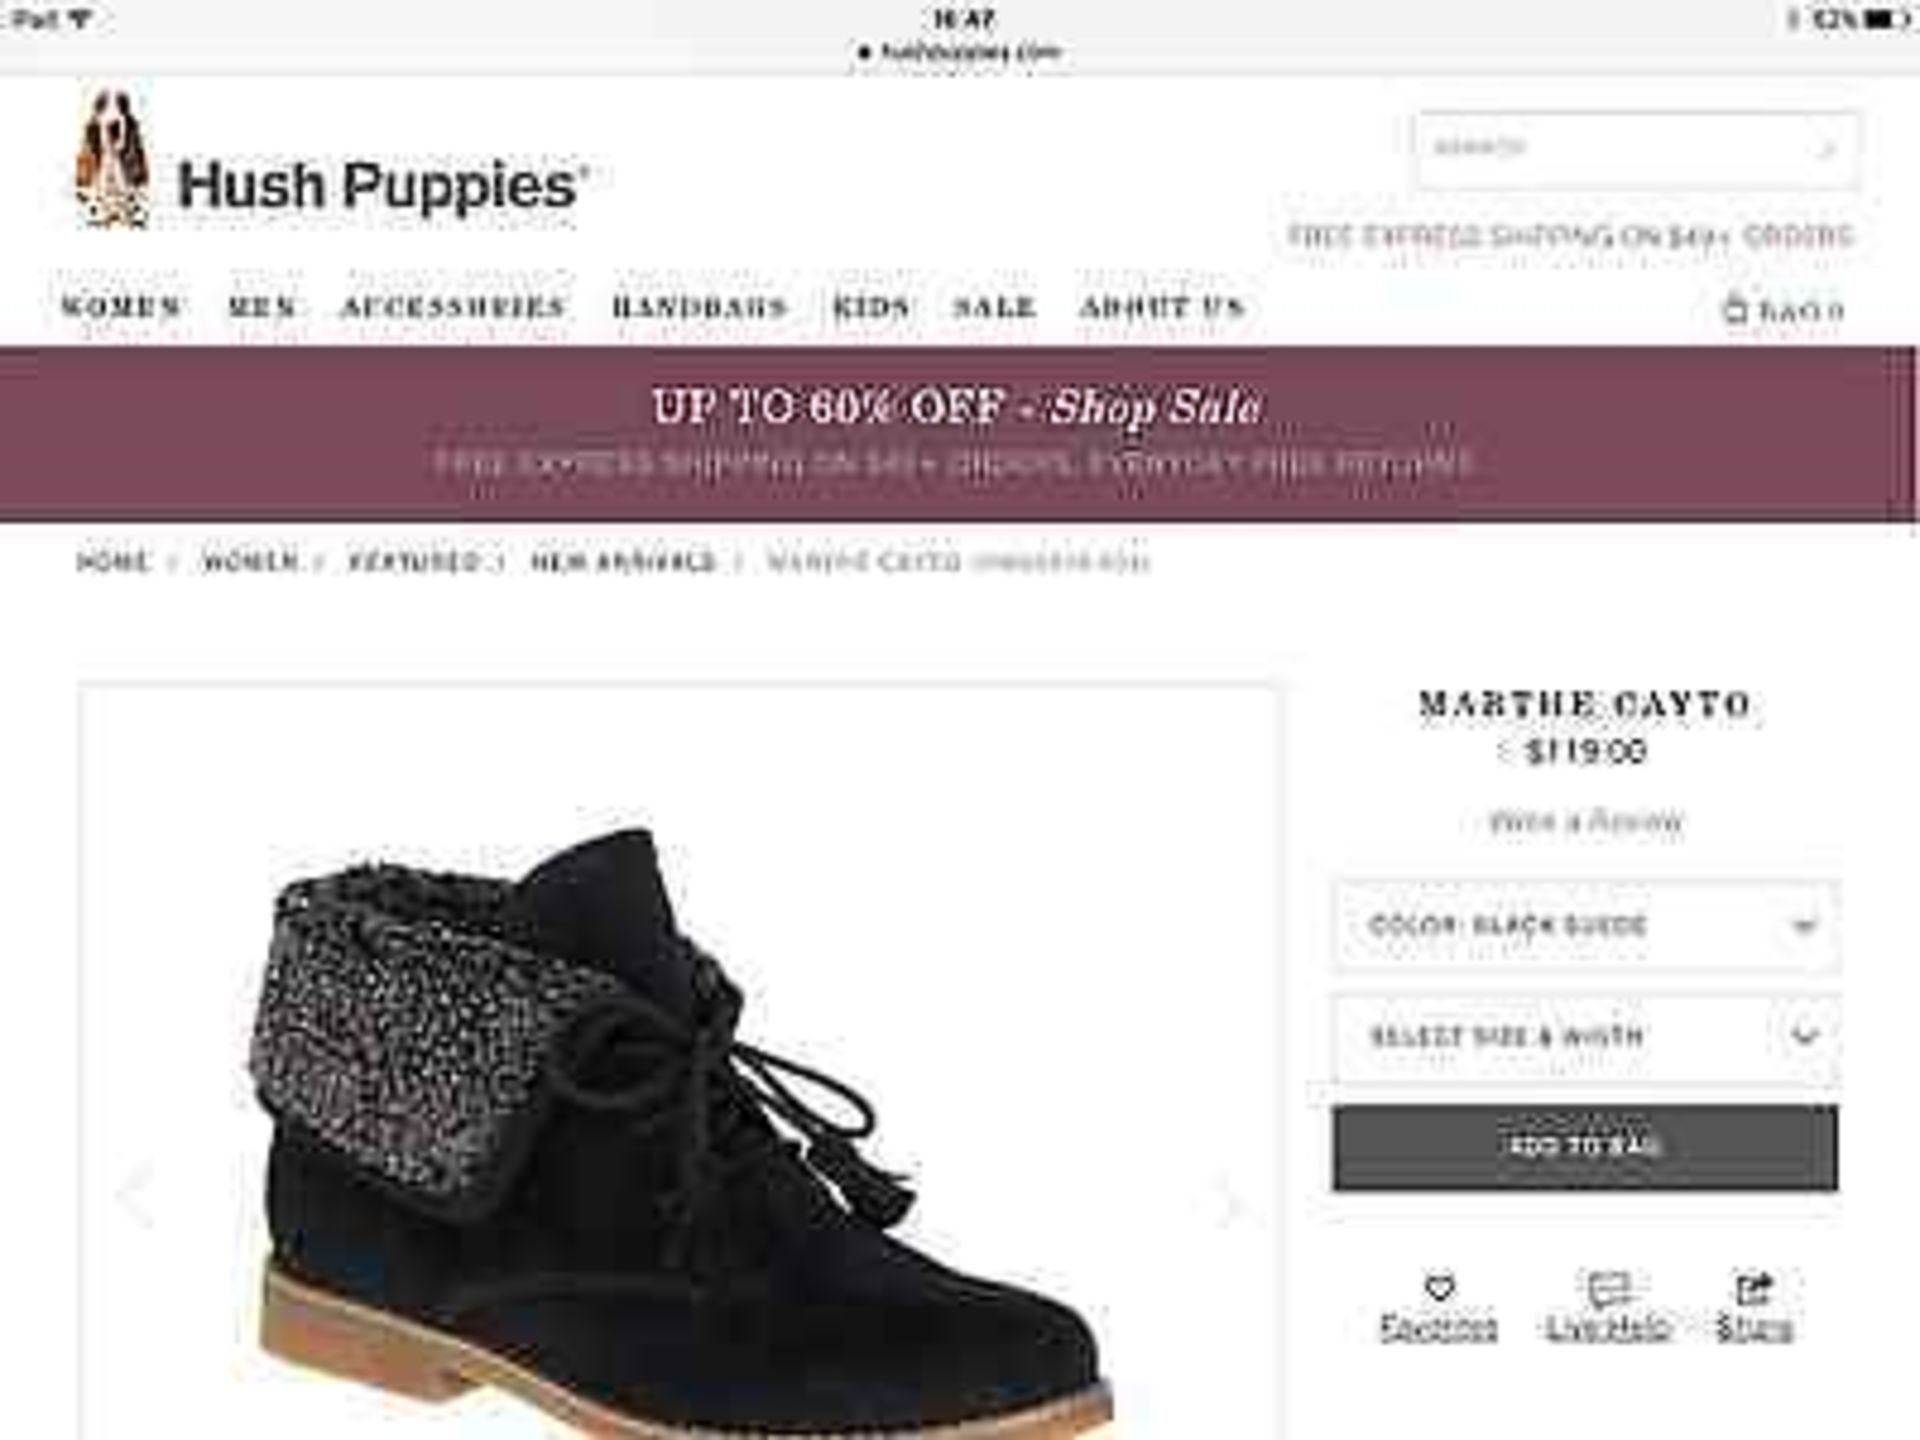 Hush Puppies Black Suede Martha Cayto Ankle Boot, Size UK 7, RRP £100 (New with box) [Ref: ] - Image 3 of 12